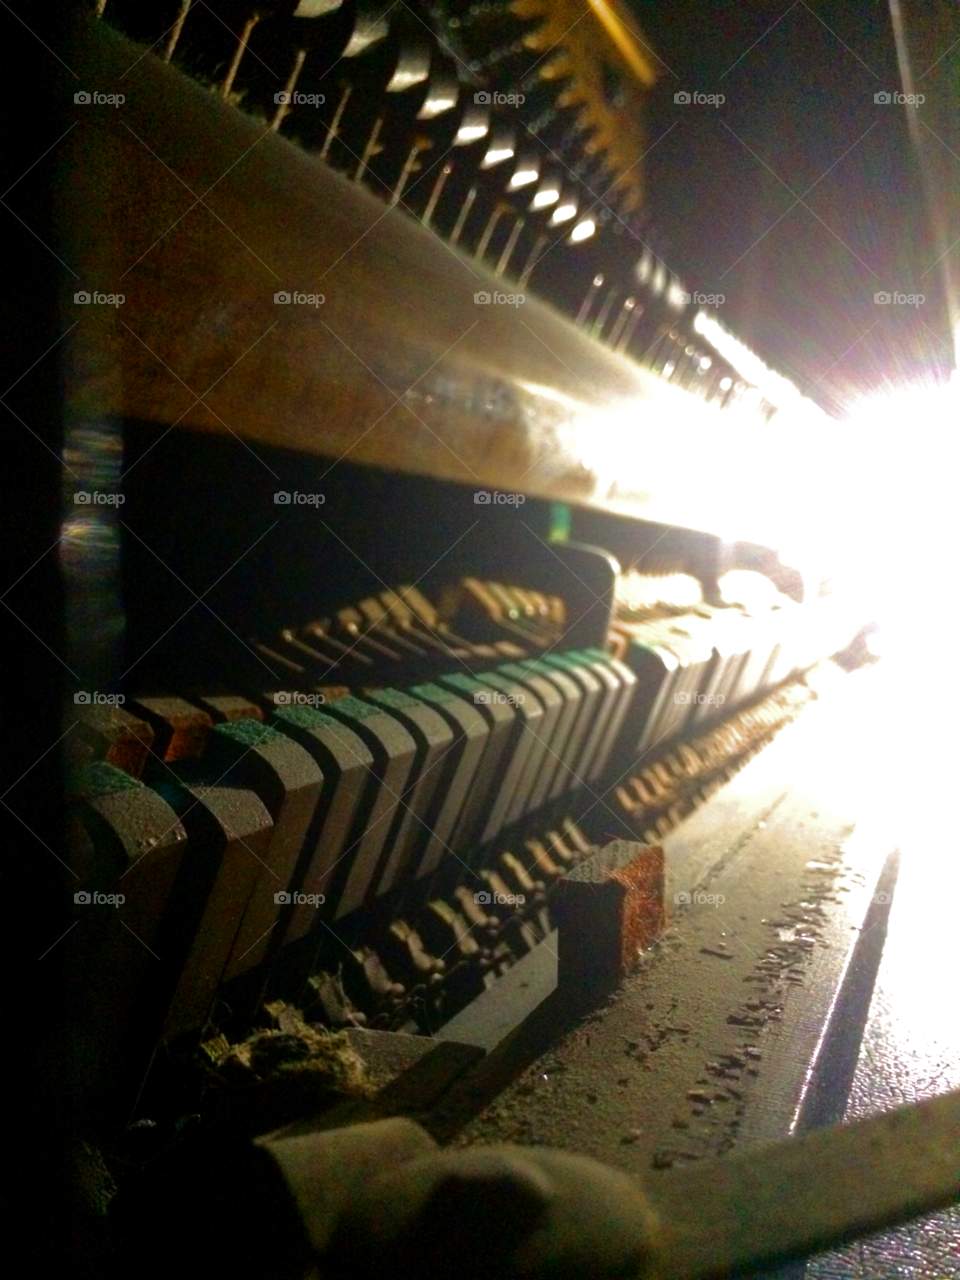 Heartstrings. Taking a look at the inside of my upright piano.